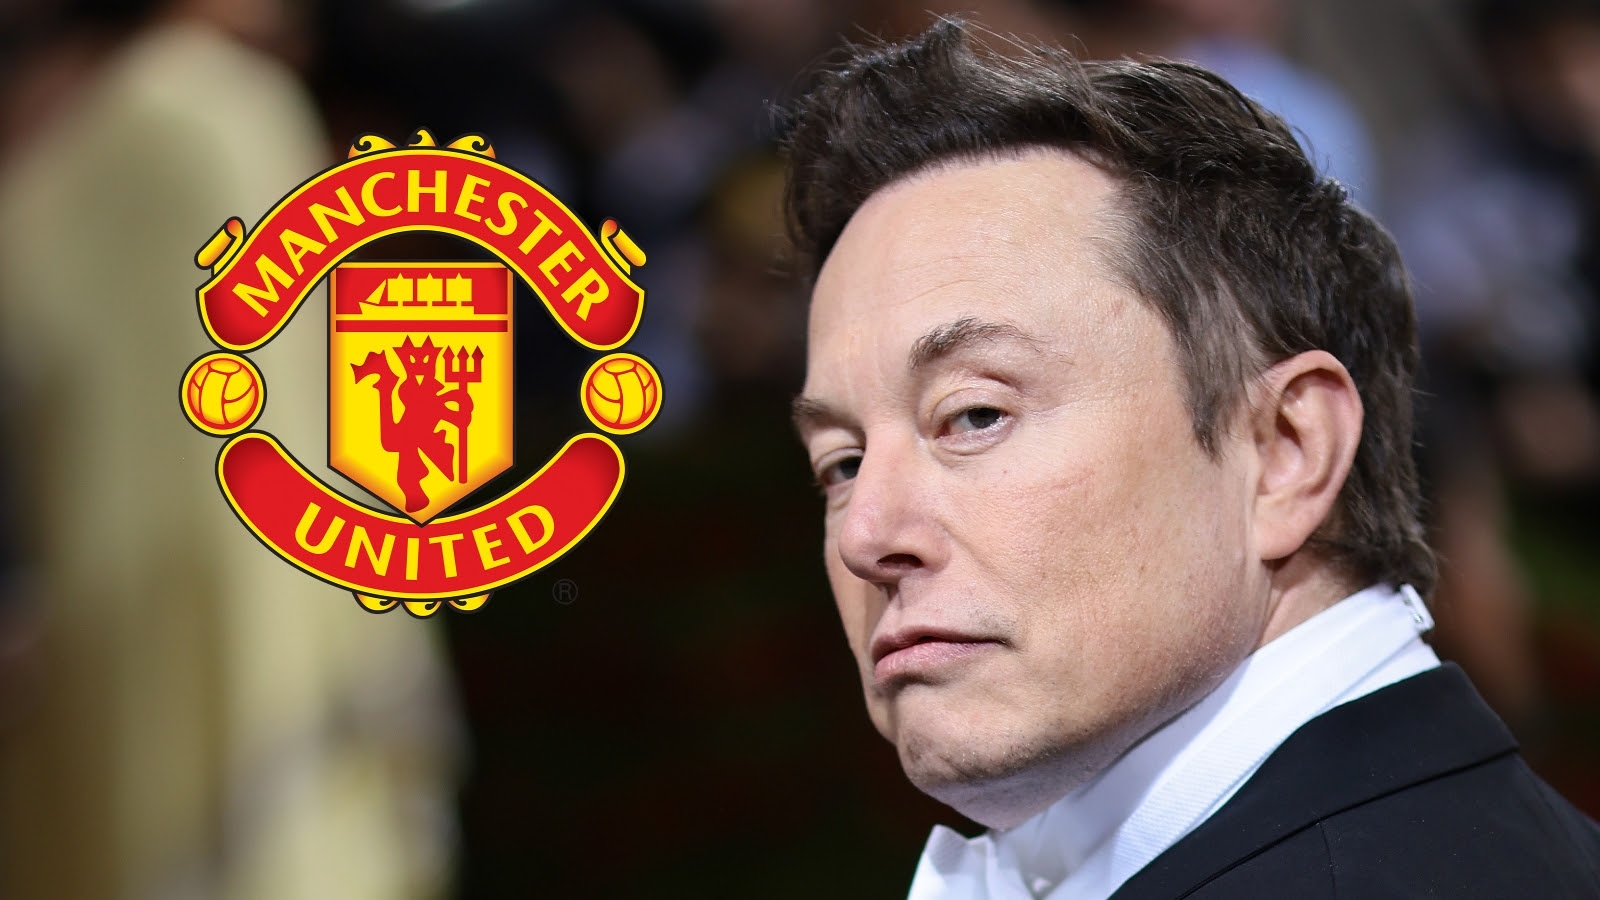 Elon Musk tweeted about buying Manchester United .